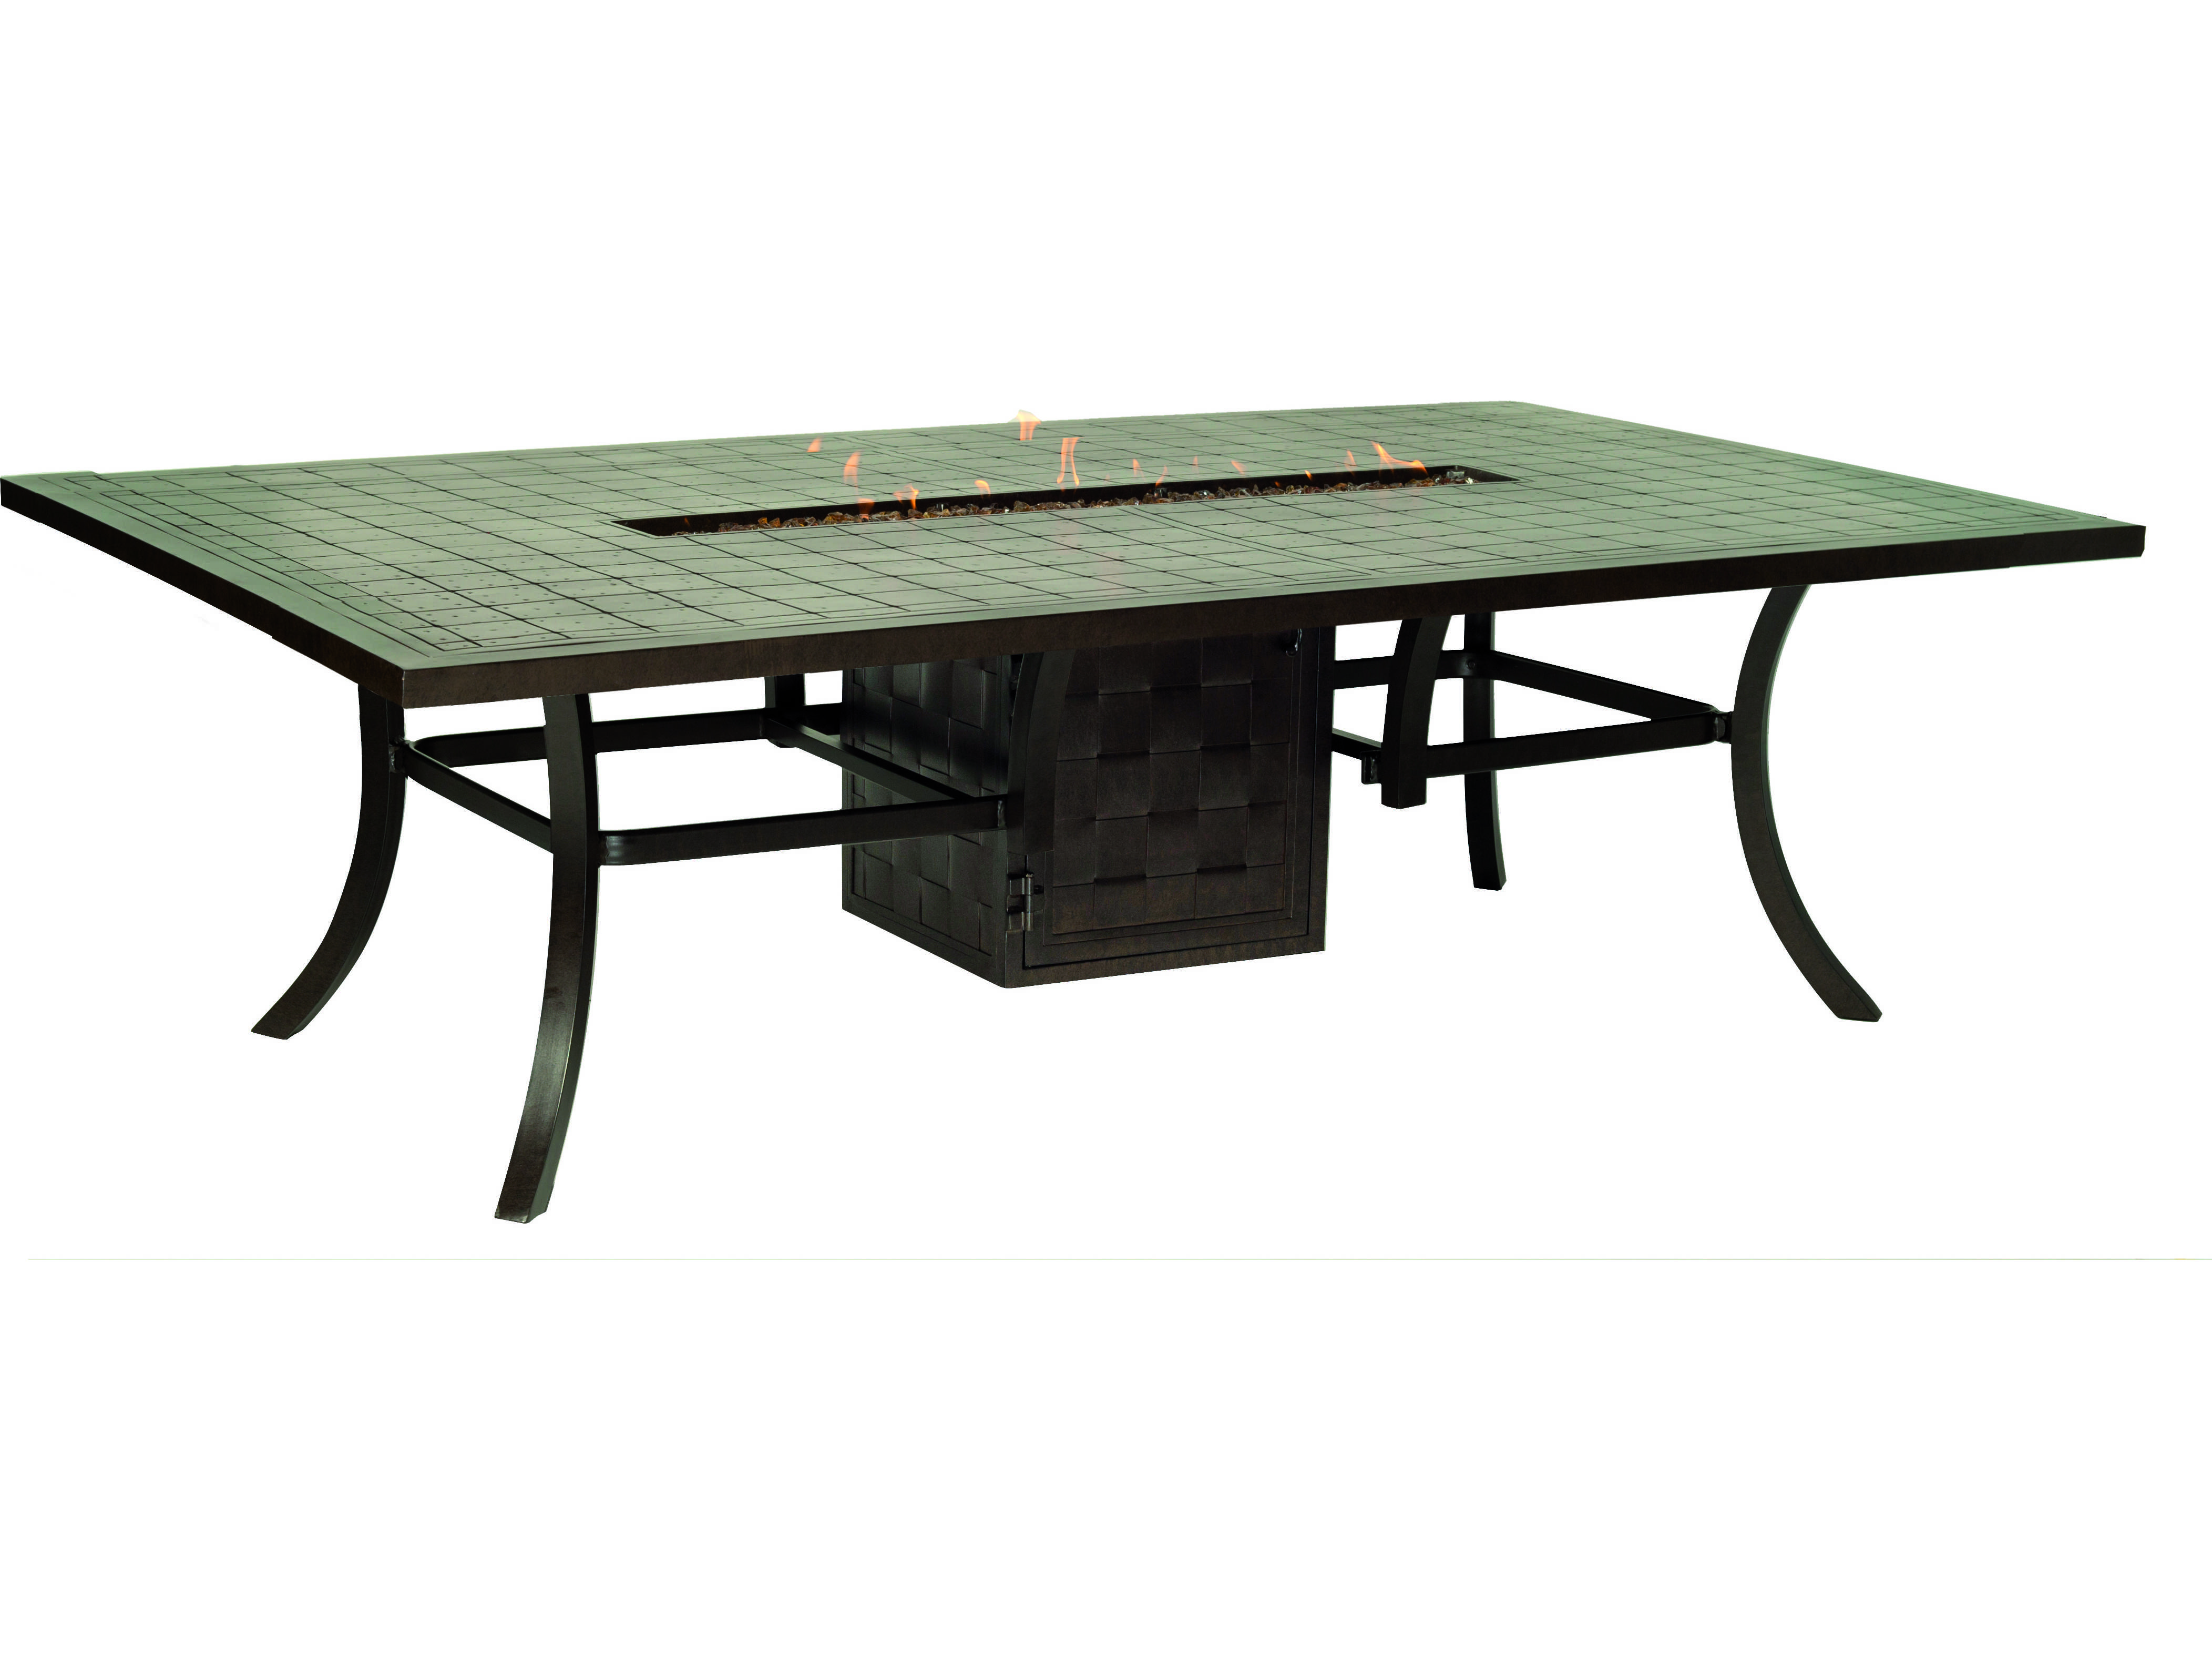 Castelle Classical Cast Aluminum 108 X, Outdoor Dining Table With Fire Pit In The Middle